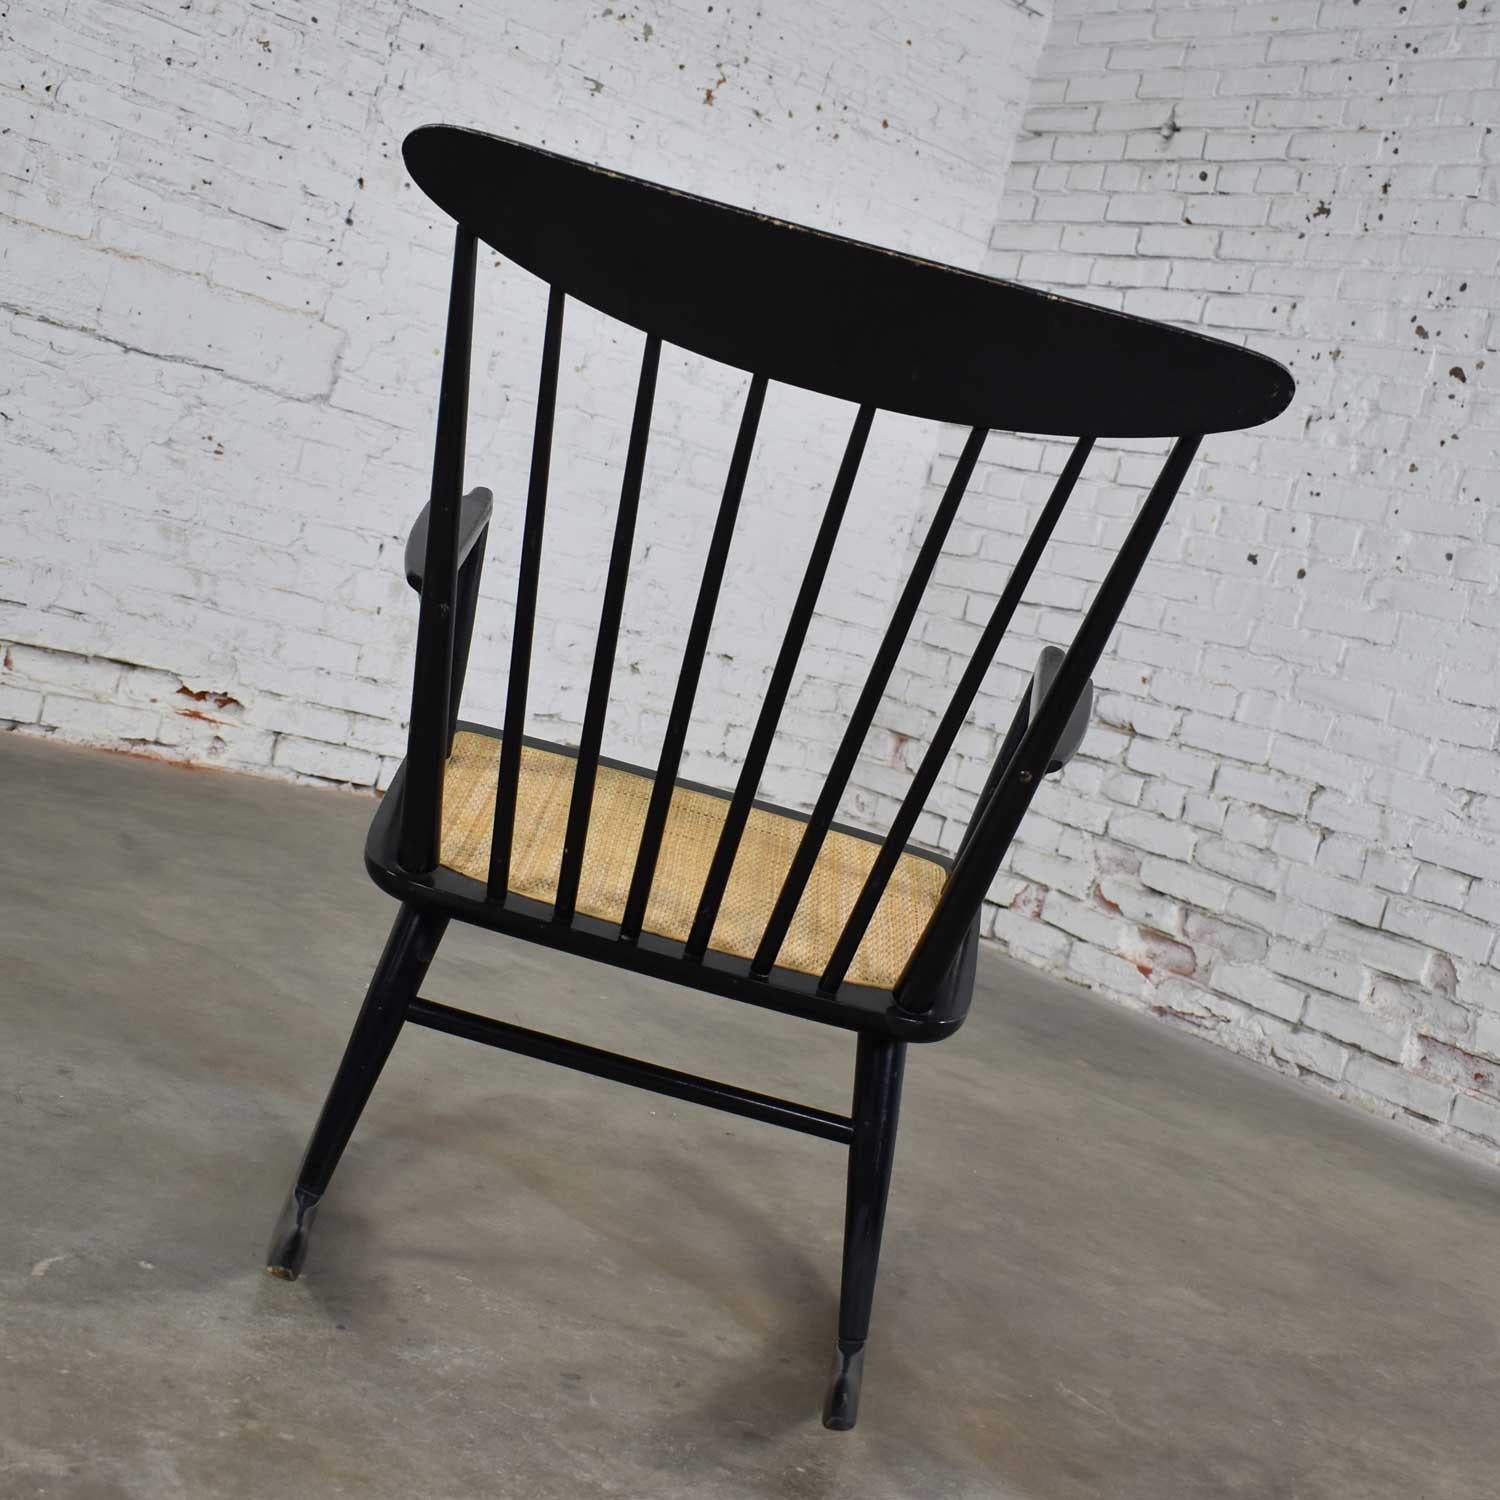 20th Century Midcentury Scandinavian Modern Style Spindle Back Rocking Chair Black with Cane